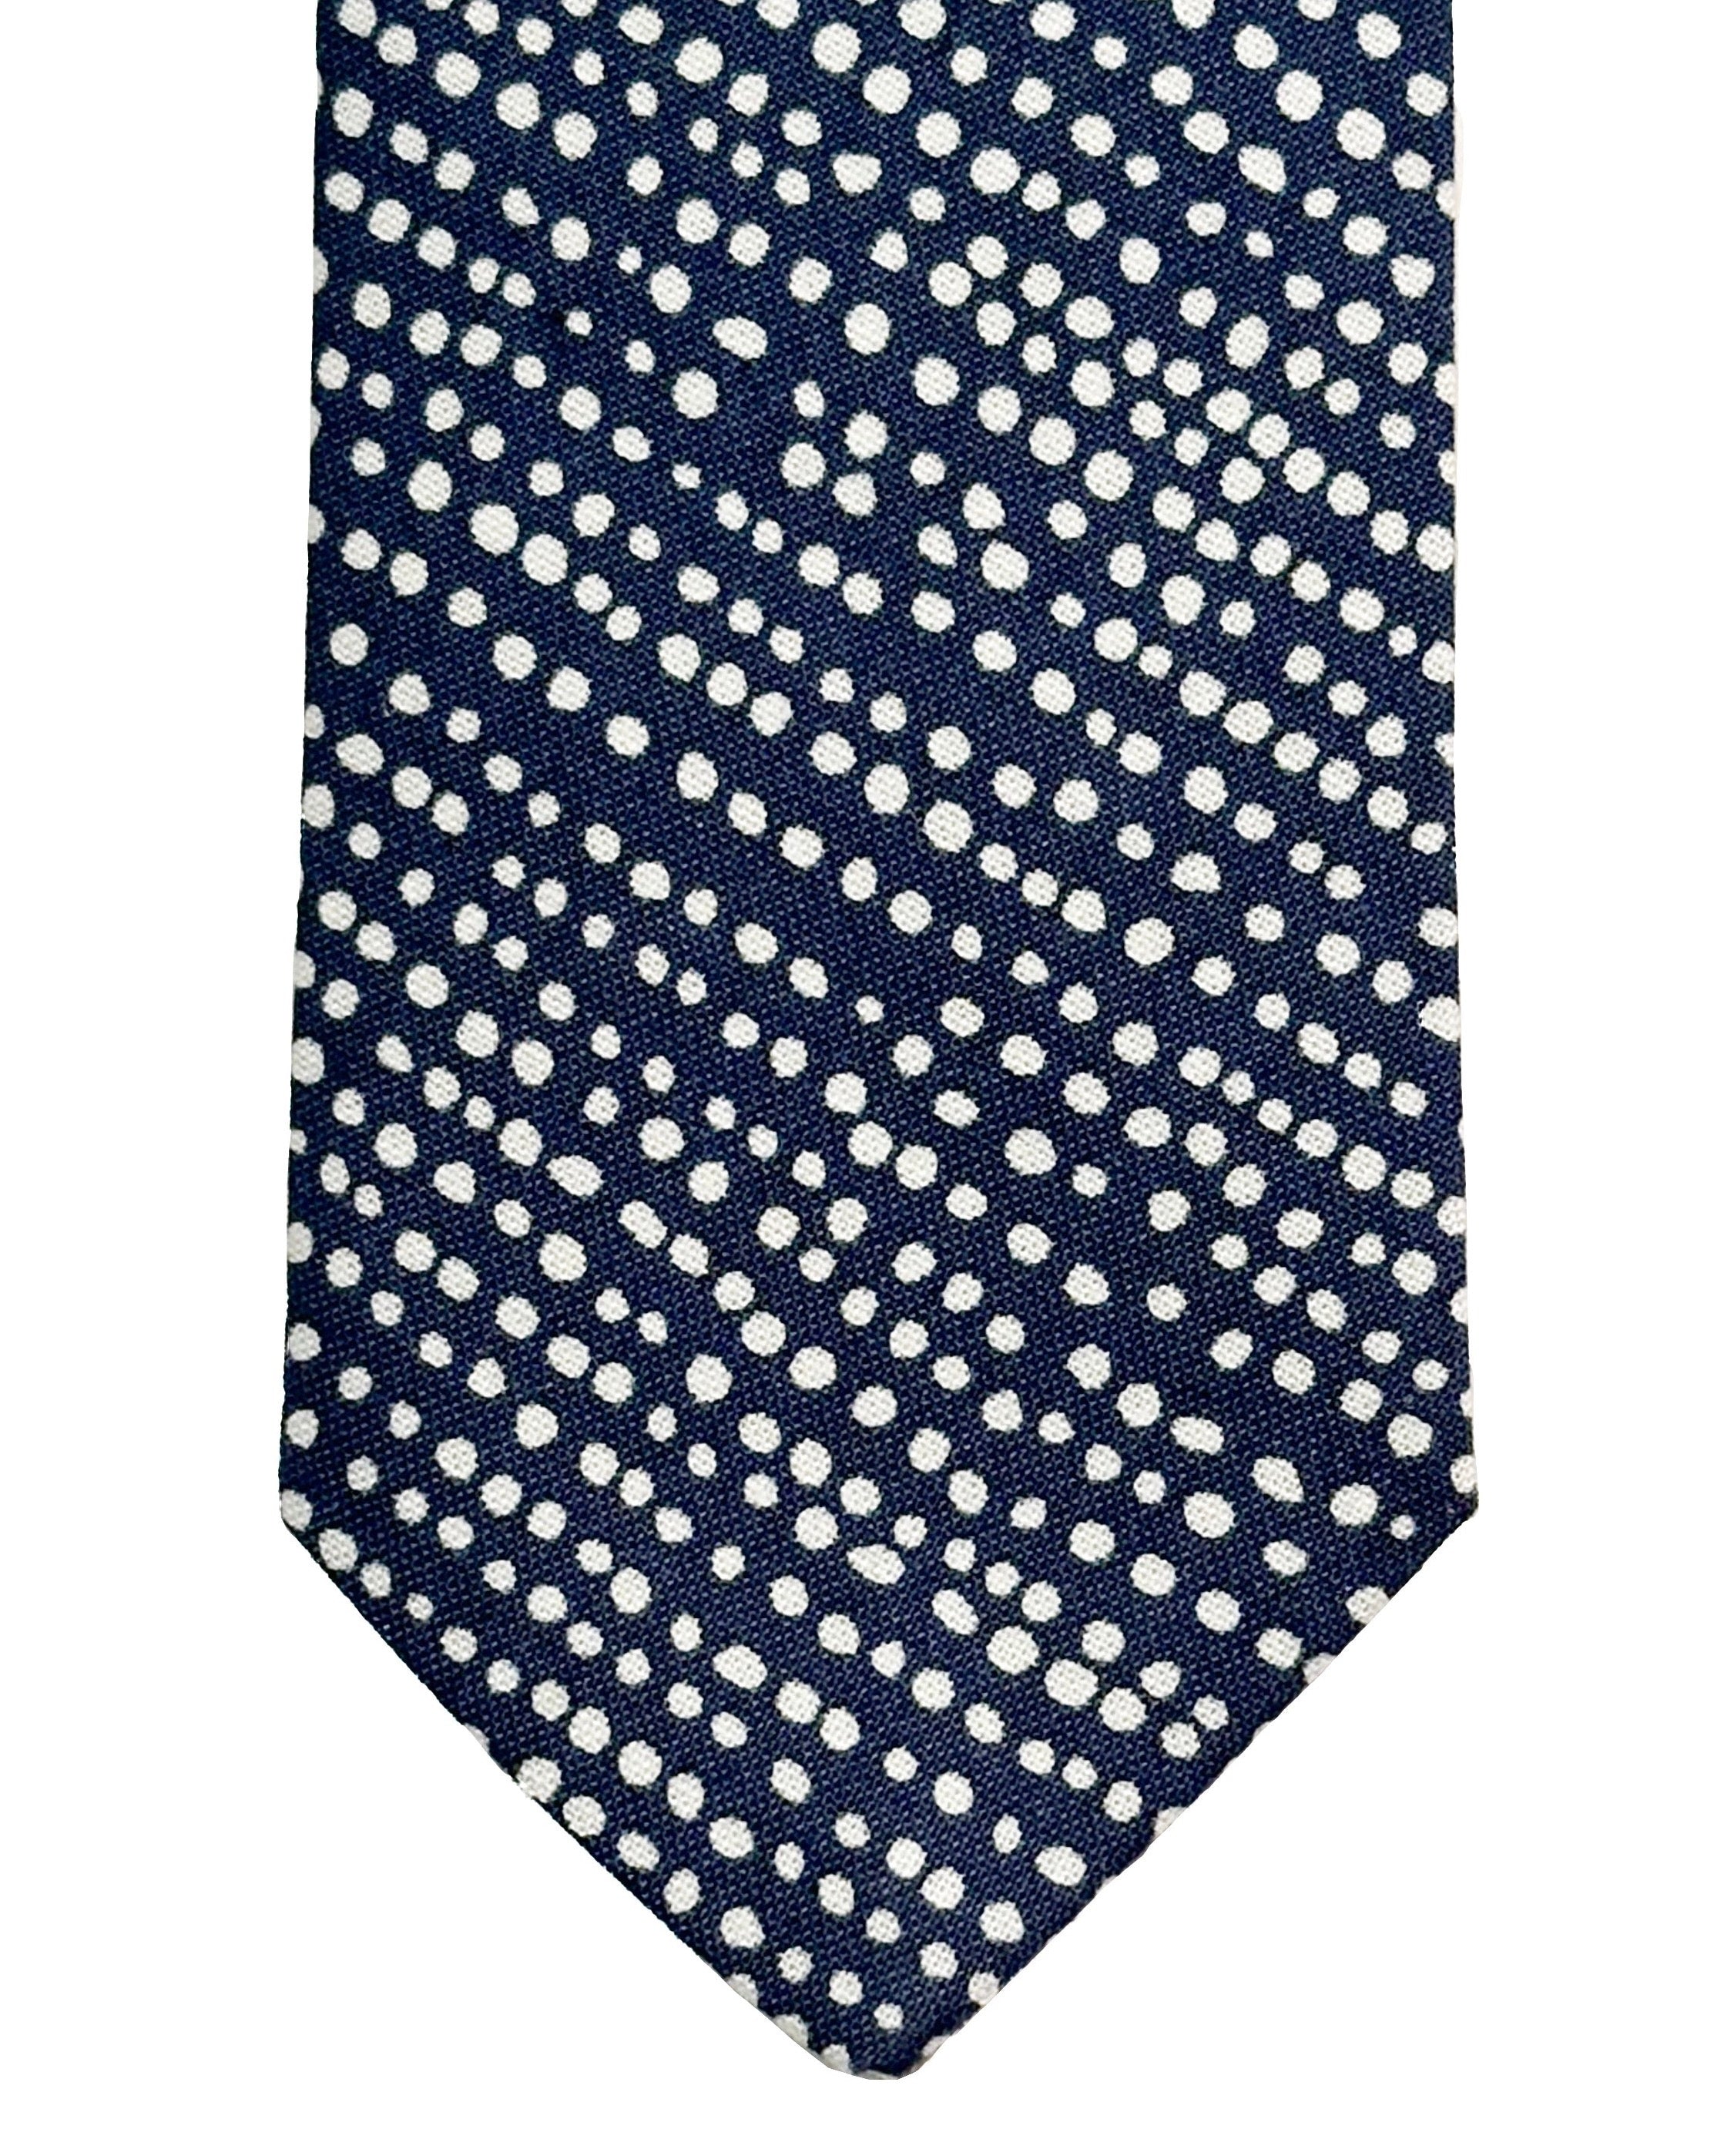 The Tie | Space Dots